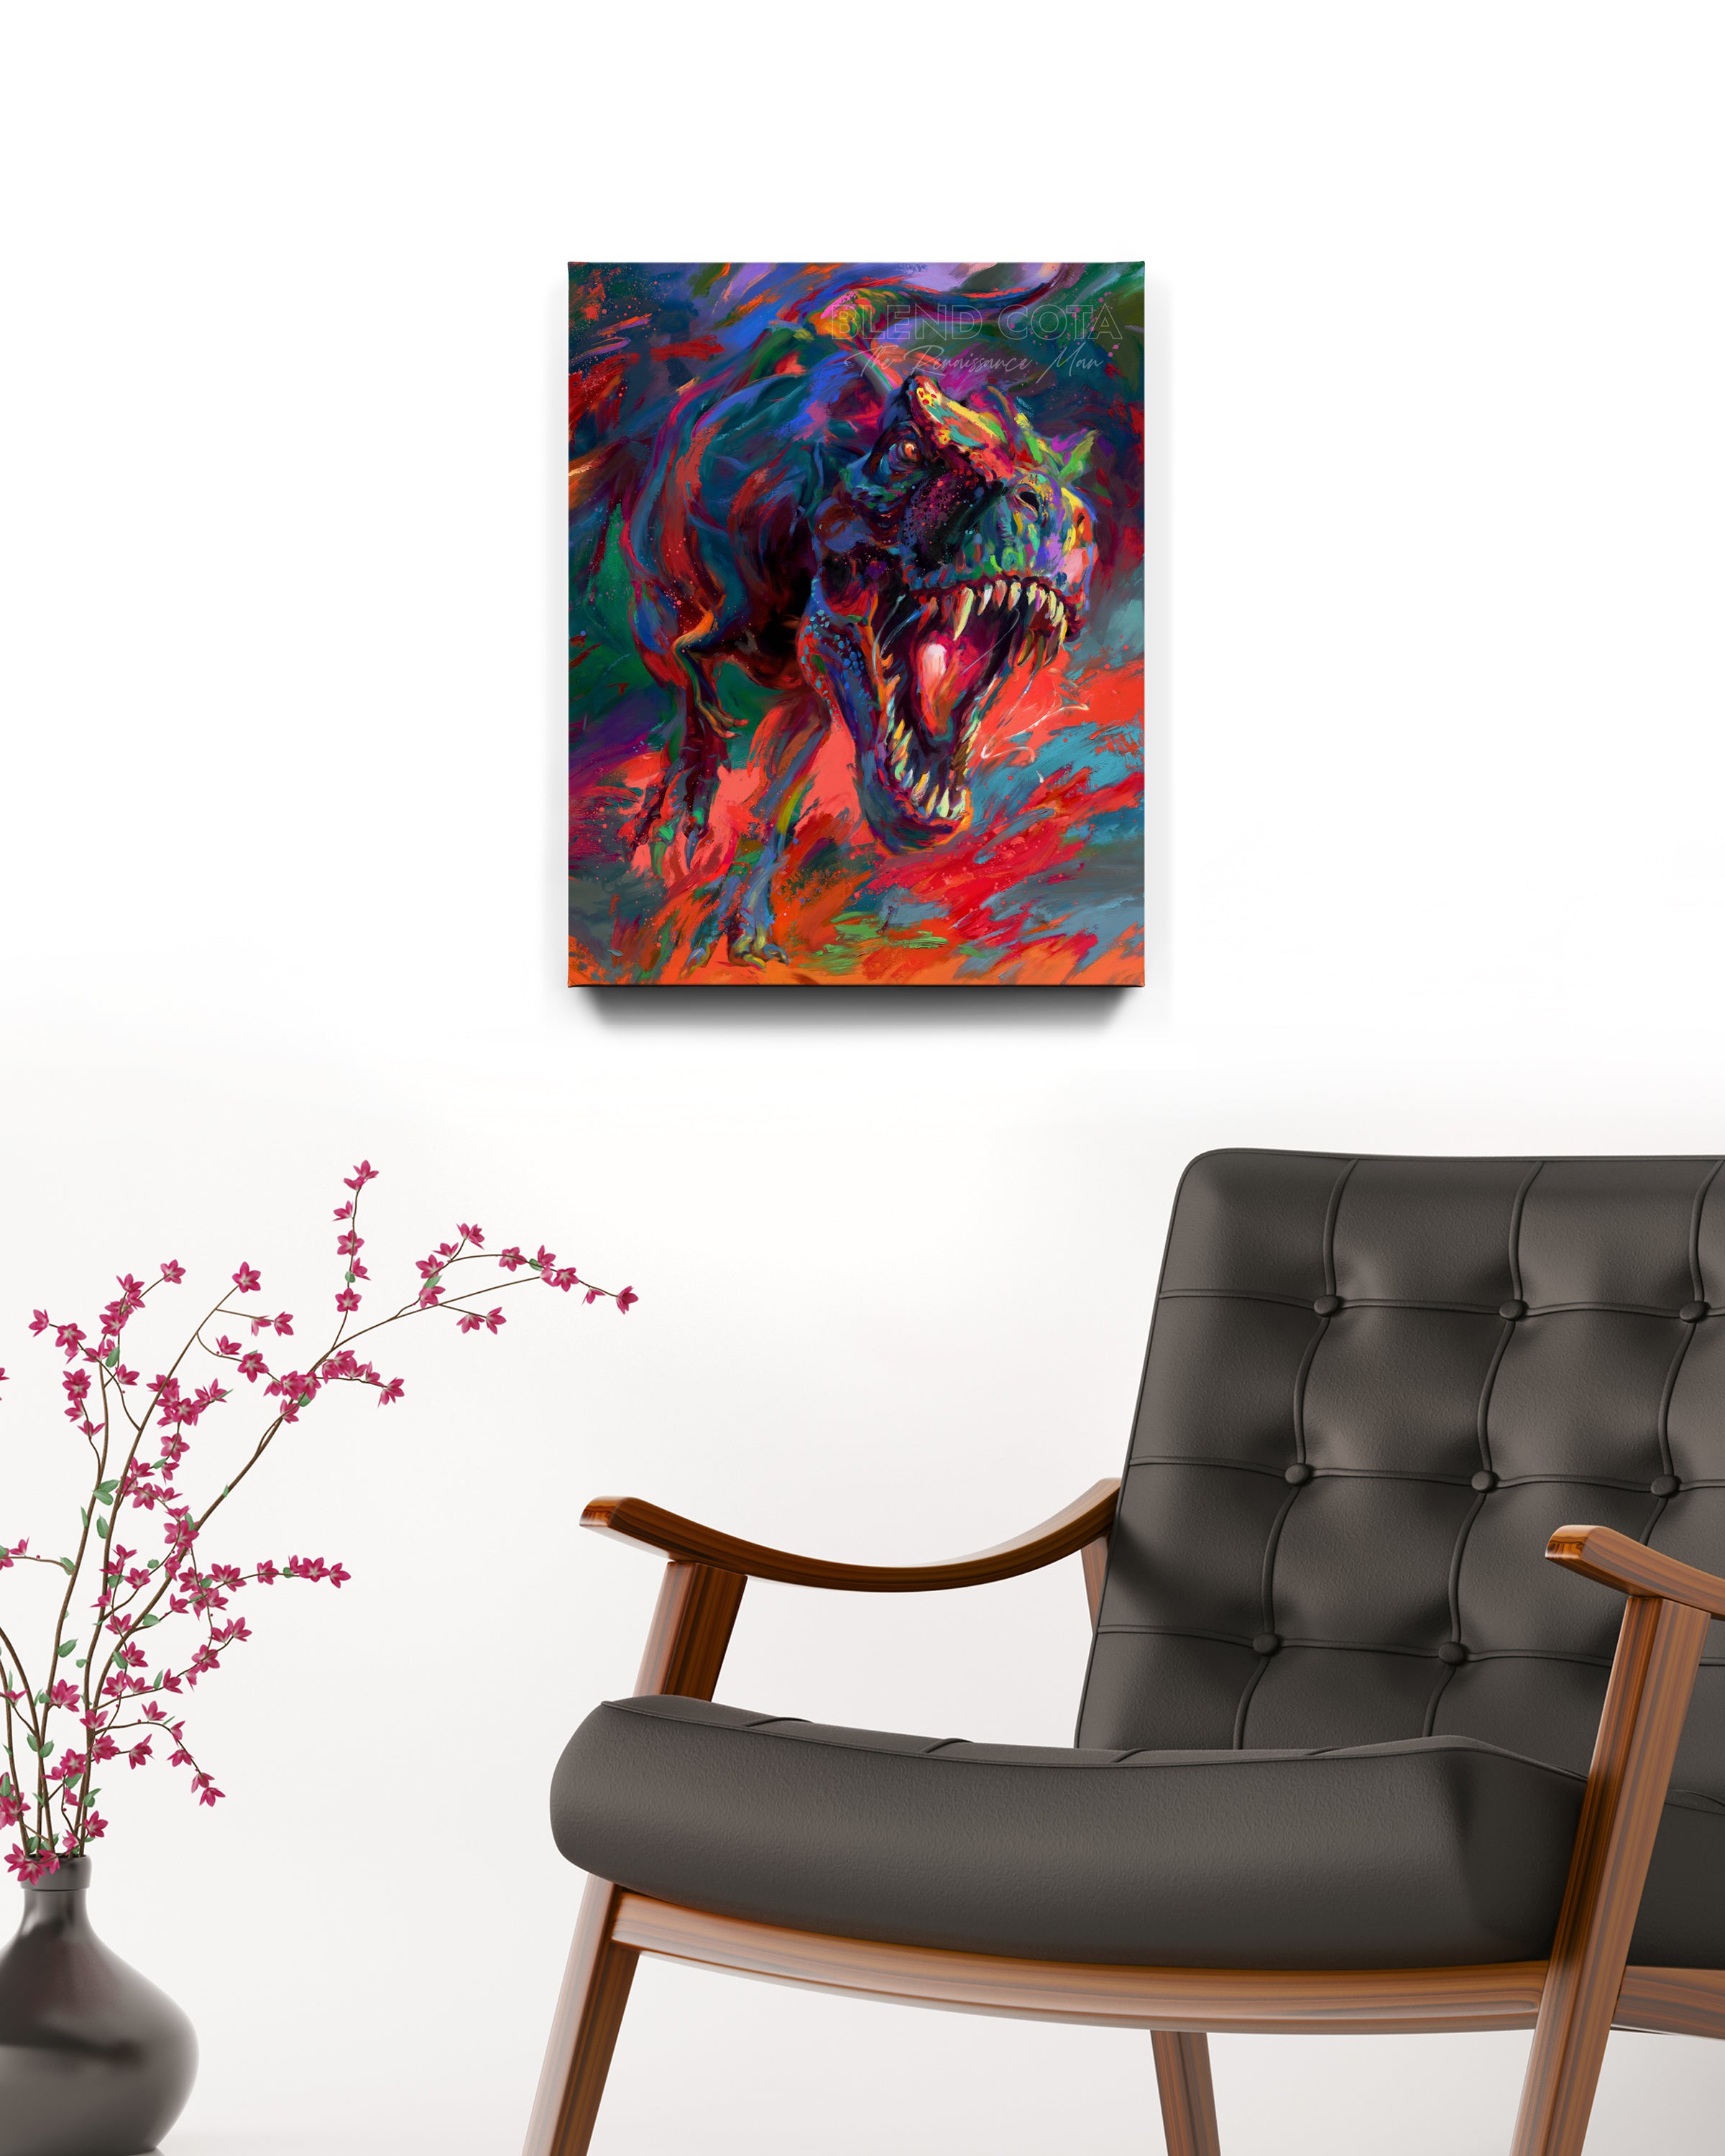 Art print on canvas of the t-rex from jurassic period the apex dinosaur predator jaw full of teeth chasing you, painted with colorful brushstrokes in an expressionistic style in a room setting.